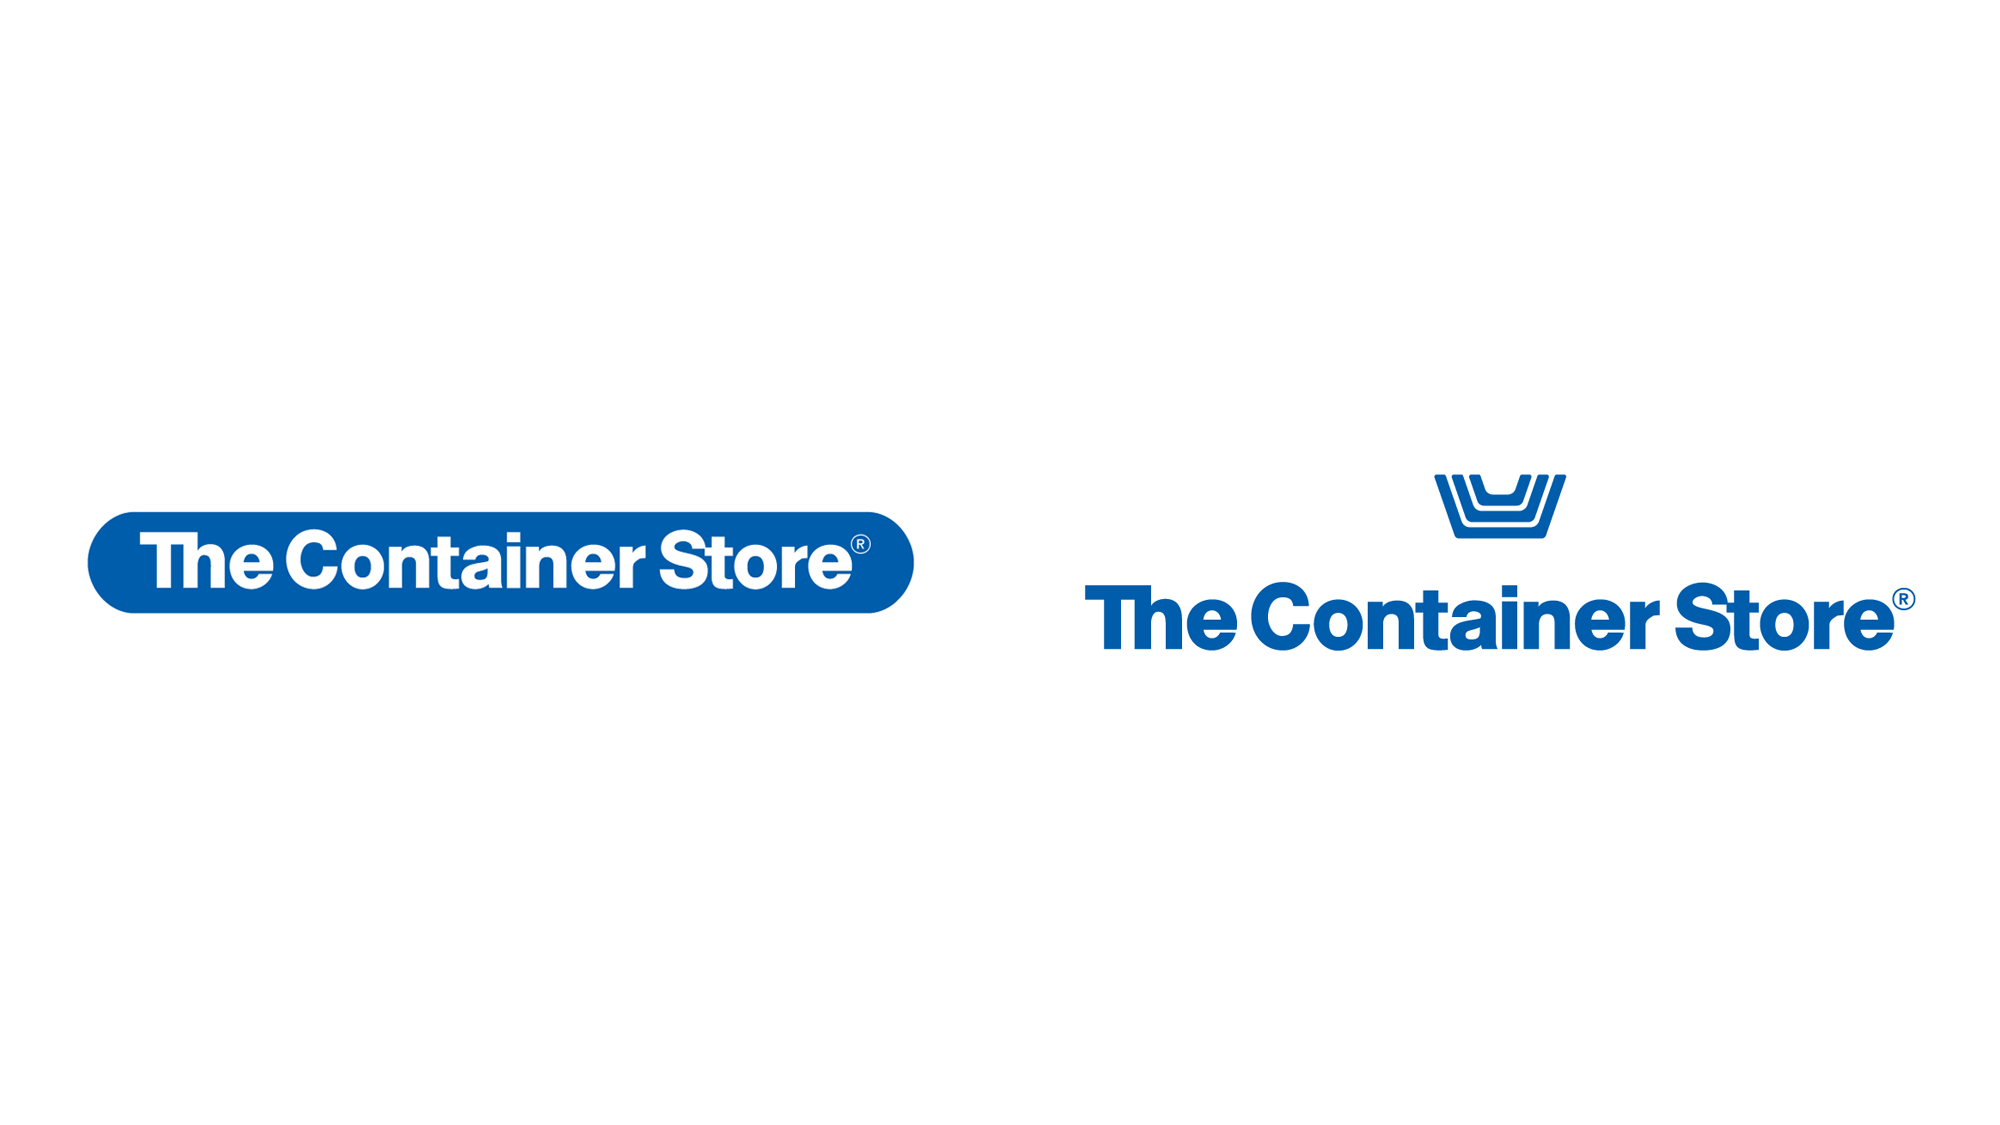 The Container Store Introduces New Loyalty Program